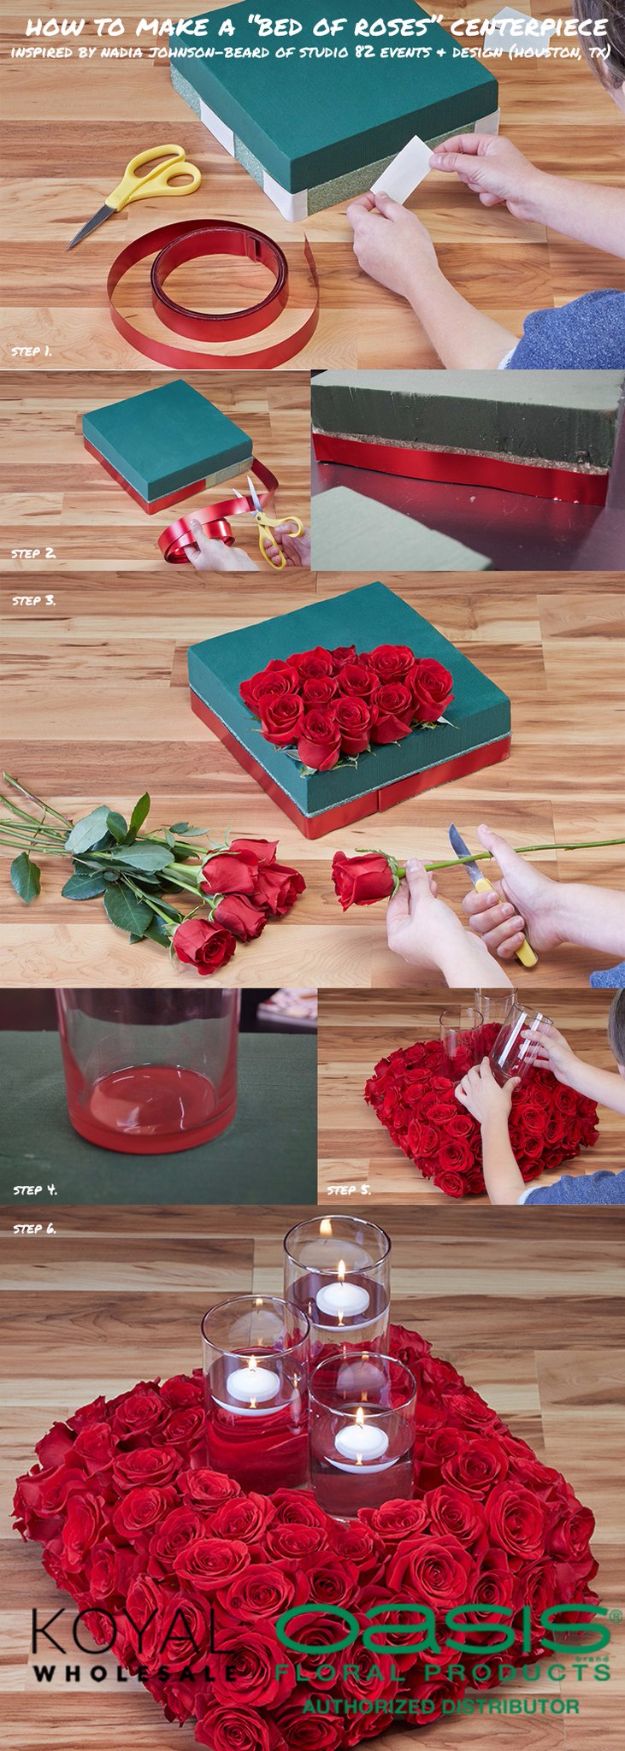 DIY Flowers for Weddings - Bed Of Roses Centerpiece - Centerpieces, Bouquets, Arrangements for Wedding Ceremony - Aisle Ideas, Rustic Bouquet Projects - Paper, Cheap, Fake Floral, Silk Flower Centerpiece To Make For Brides on A Budget - Decor for Spring, Summer, Winter and Fall http://diyjoy.com/diy-flowers-for-weddings